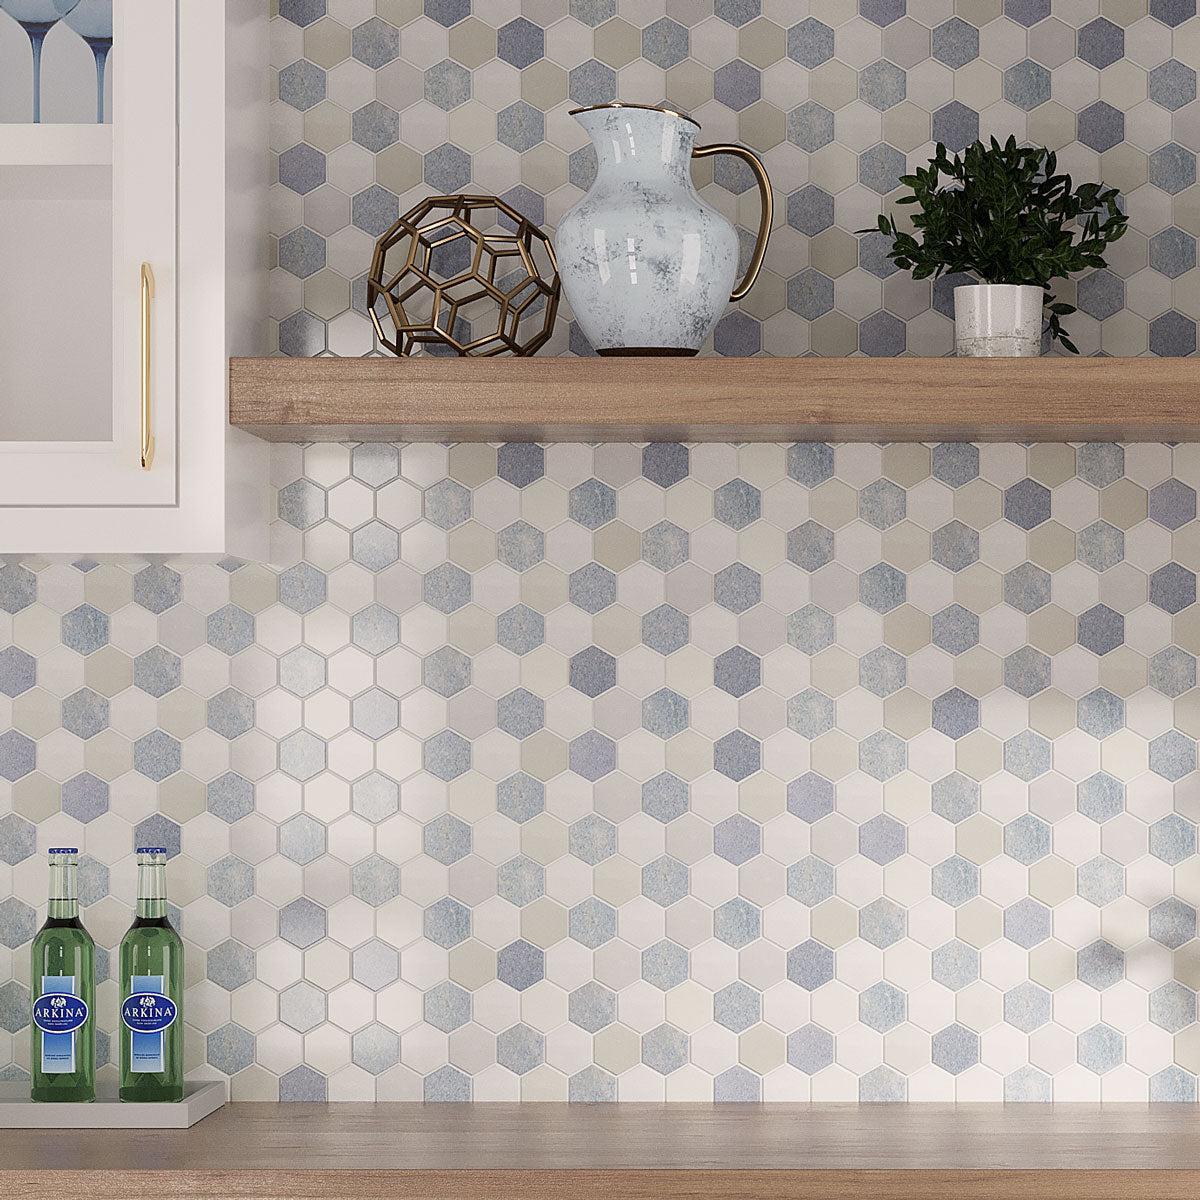 BLue and white bar backsplash with natural marble hexagon tiles